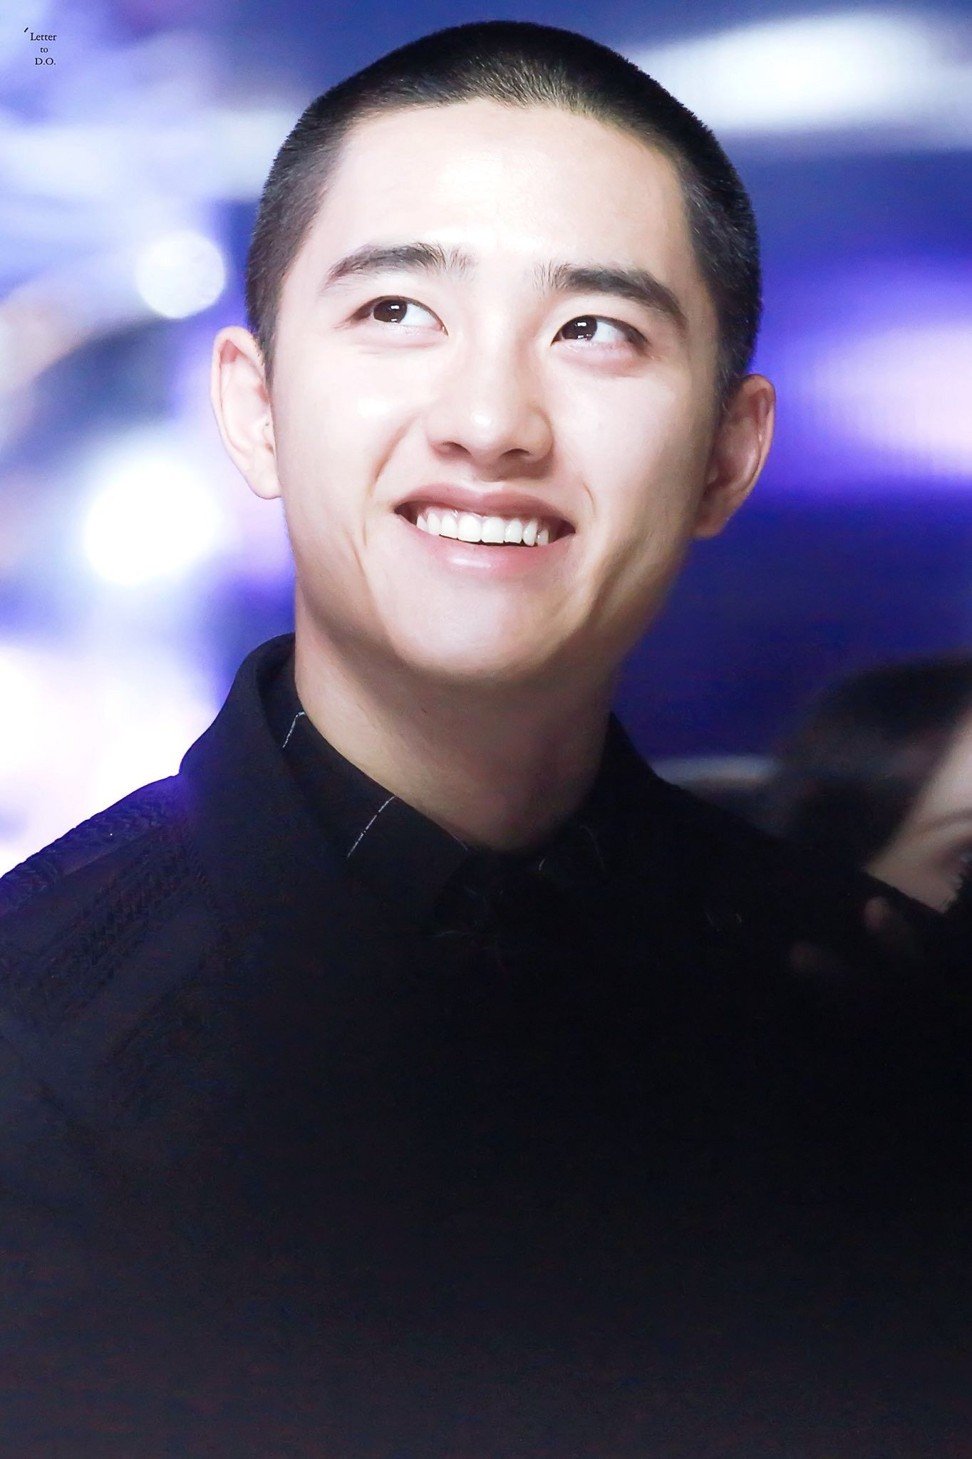 D.O.is best-known for his vocal talents and for singing soulful ballads.